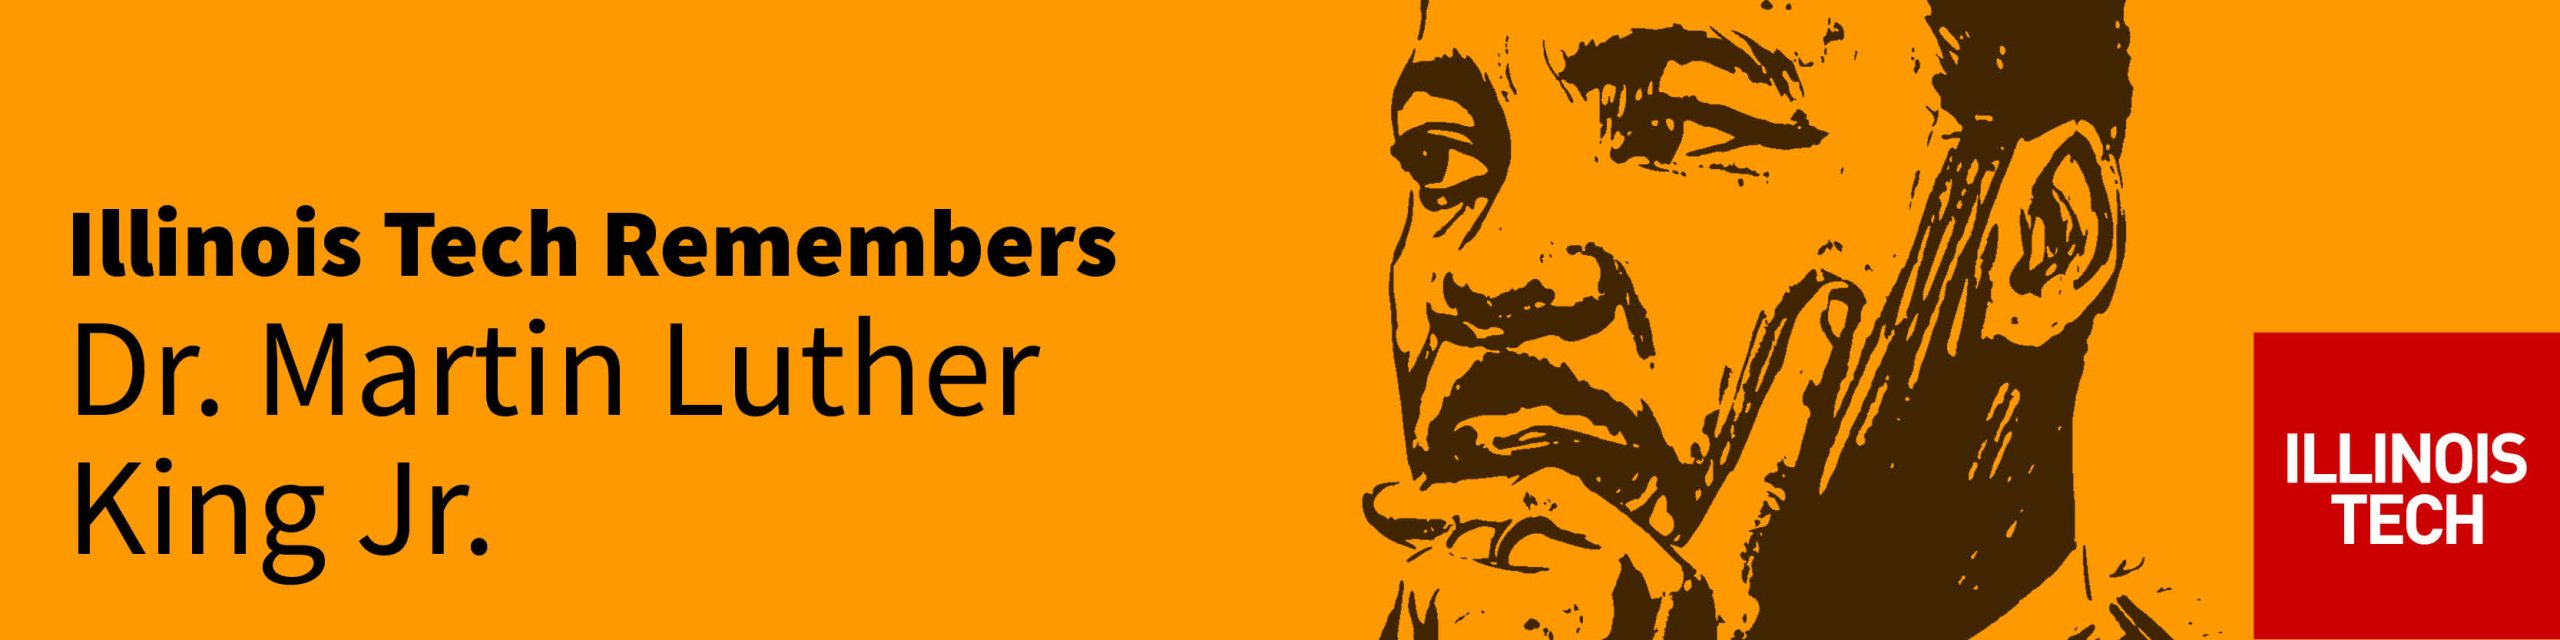 Graphic shows an illustration of MLK with the text "Illinois Tech Remembers Dr. Martin Luther King Jr."